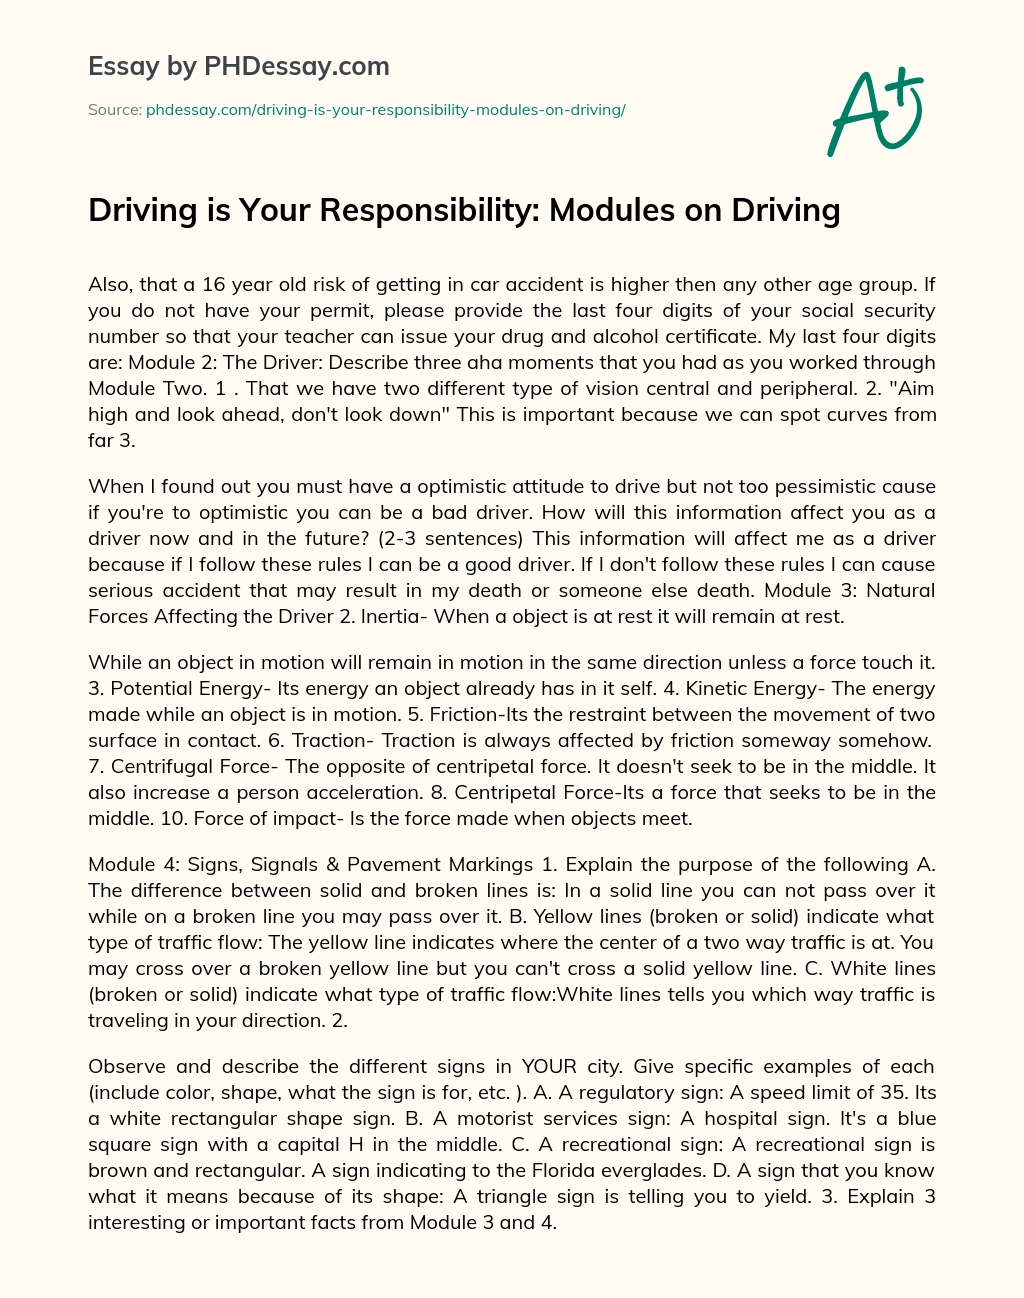 Driving is Your Responsibility: Modules on Driving essay